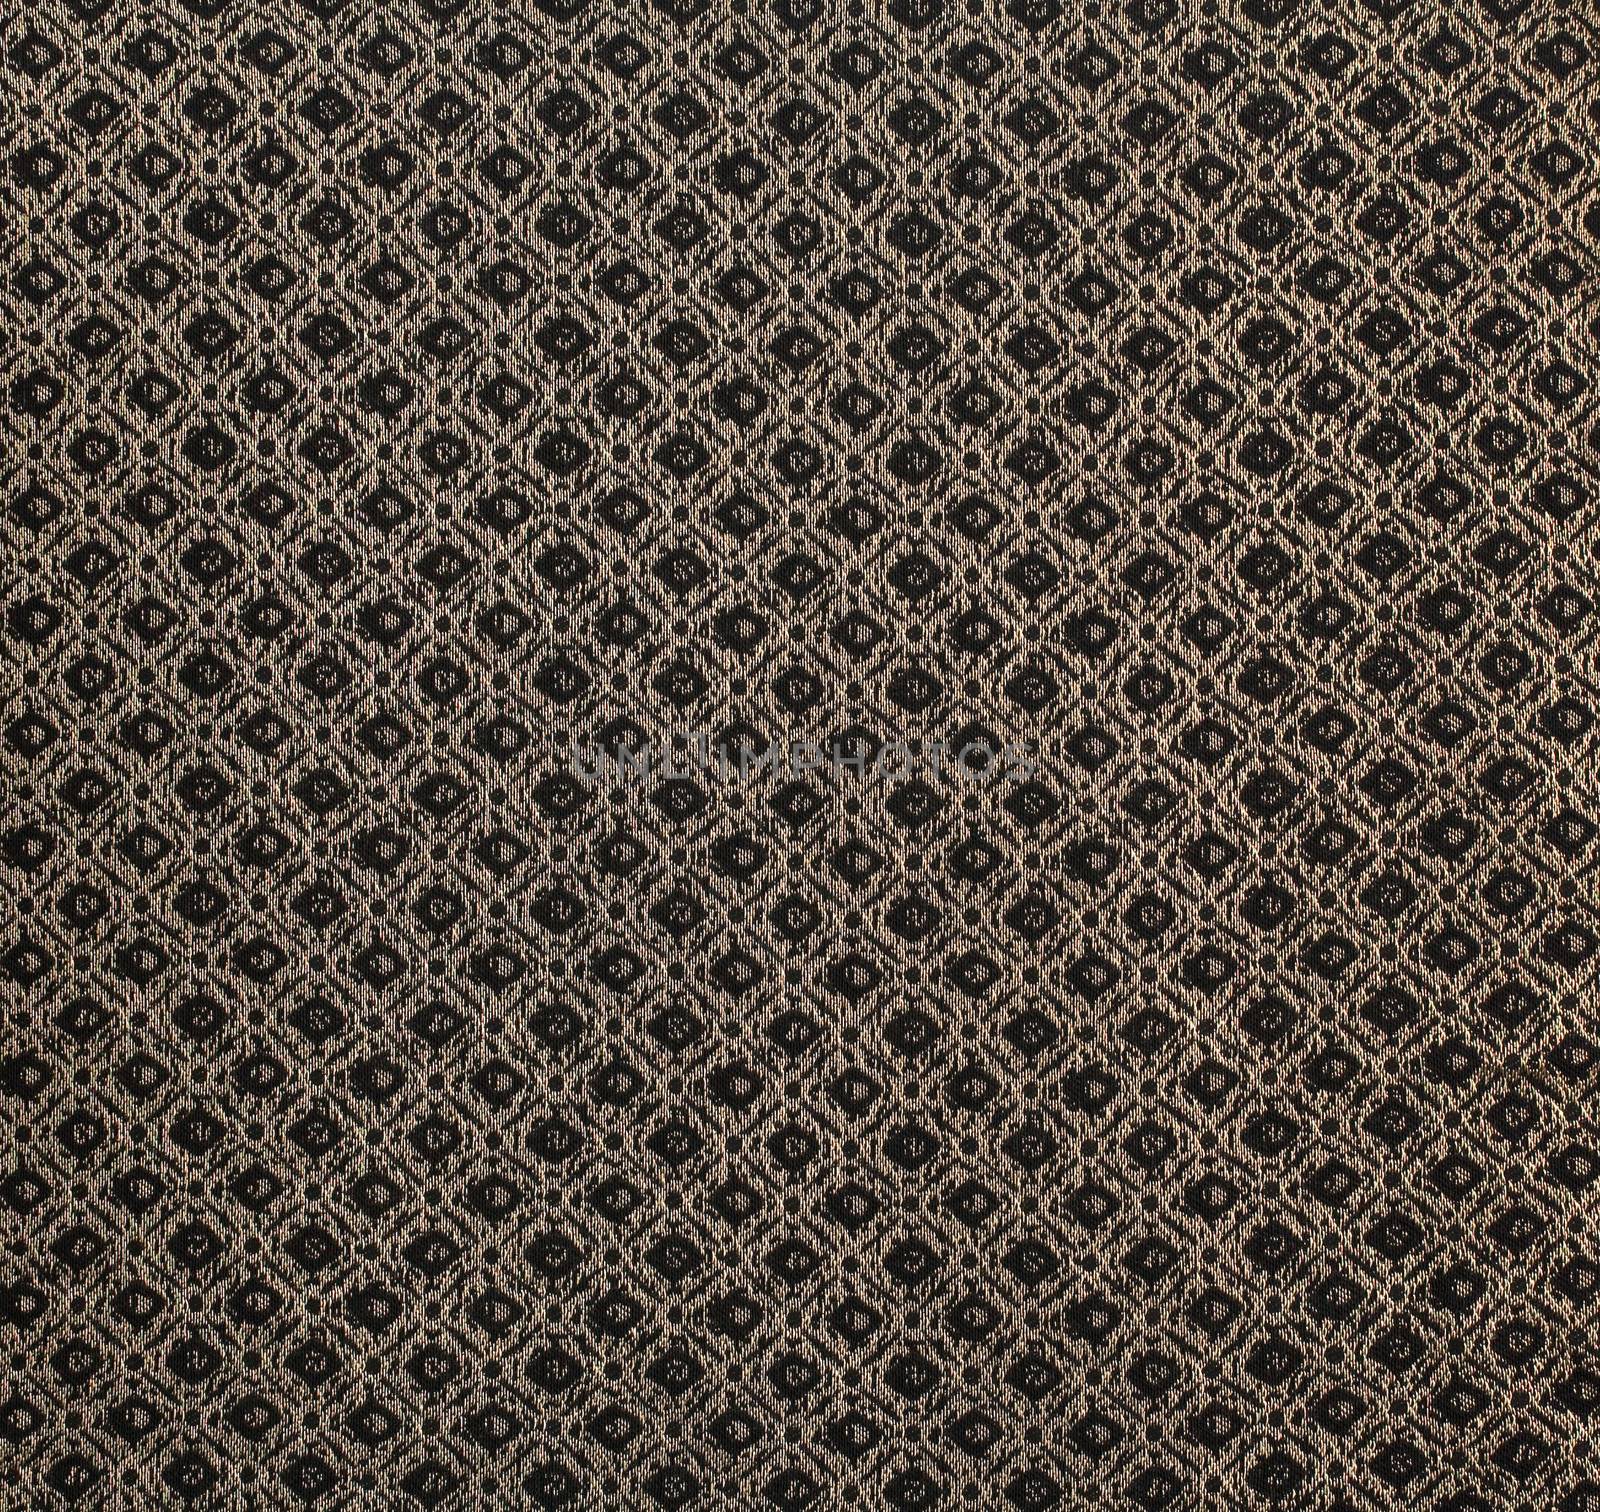 Pattern textile fabric material texture background closeup.